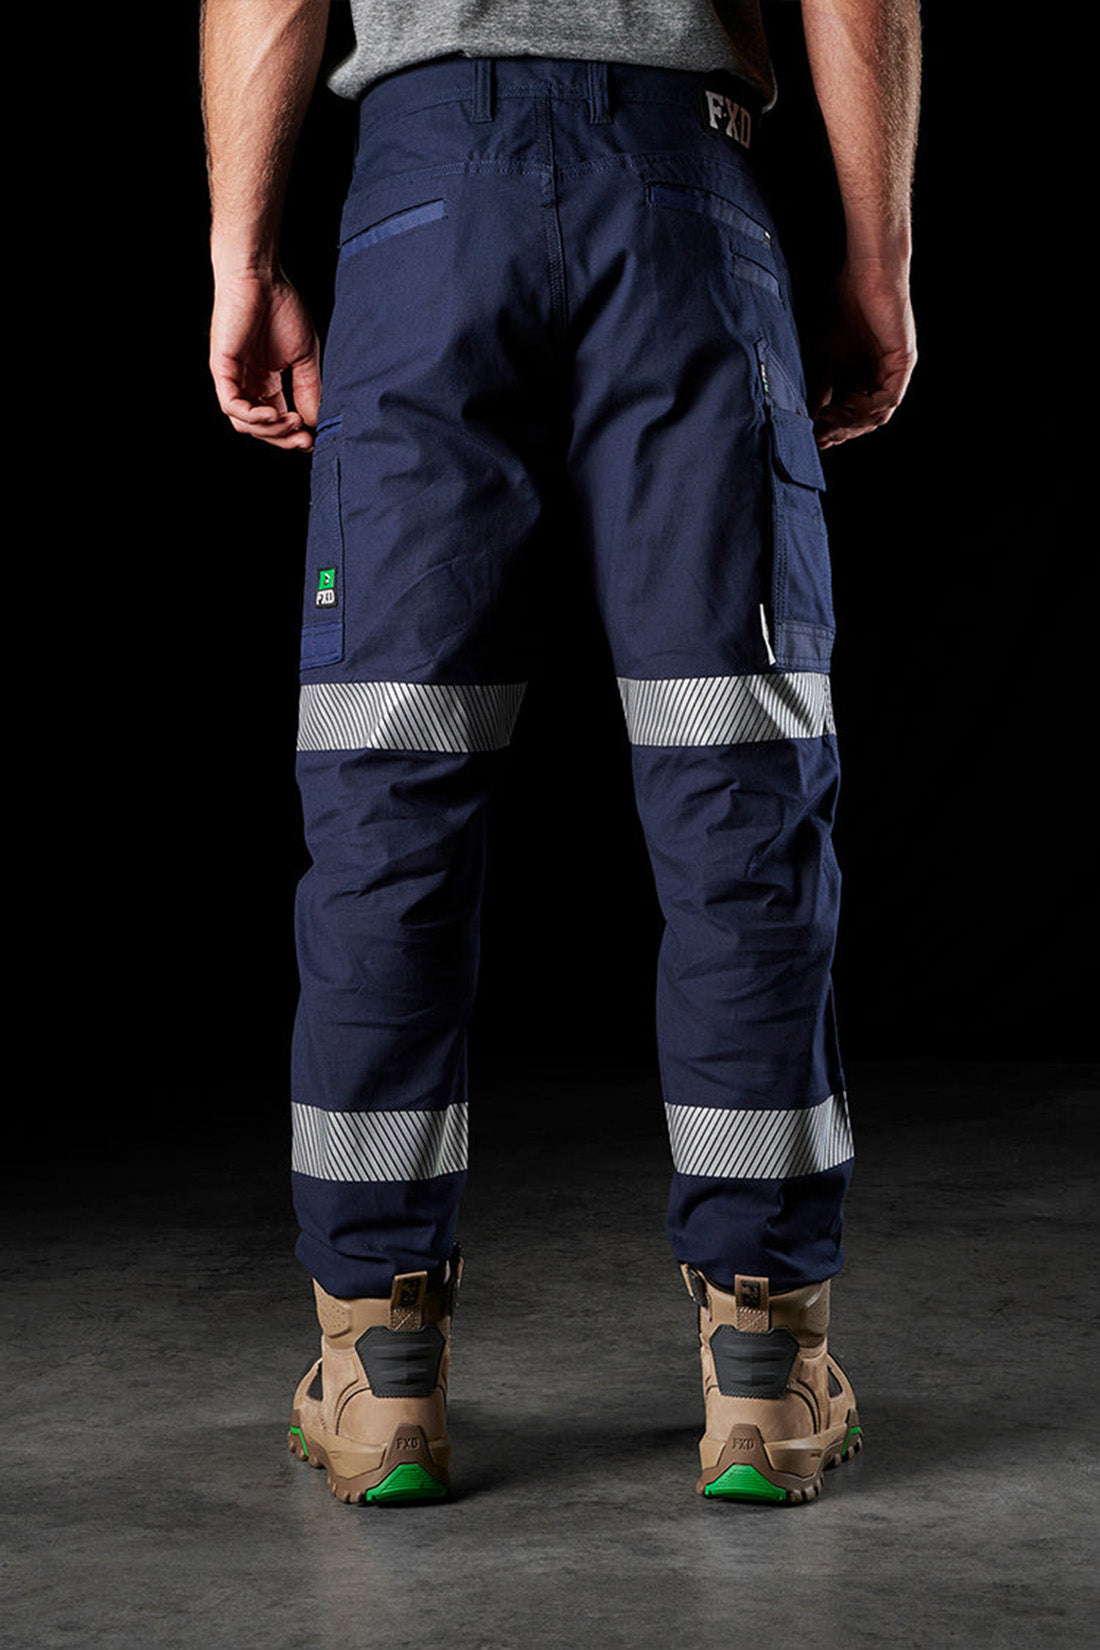 FXD WP-3T REFLECTIVE STRETCH WORK PANT NAVY